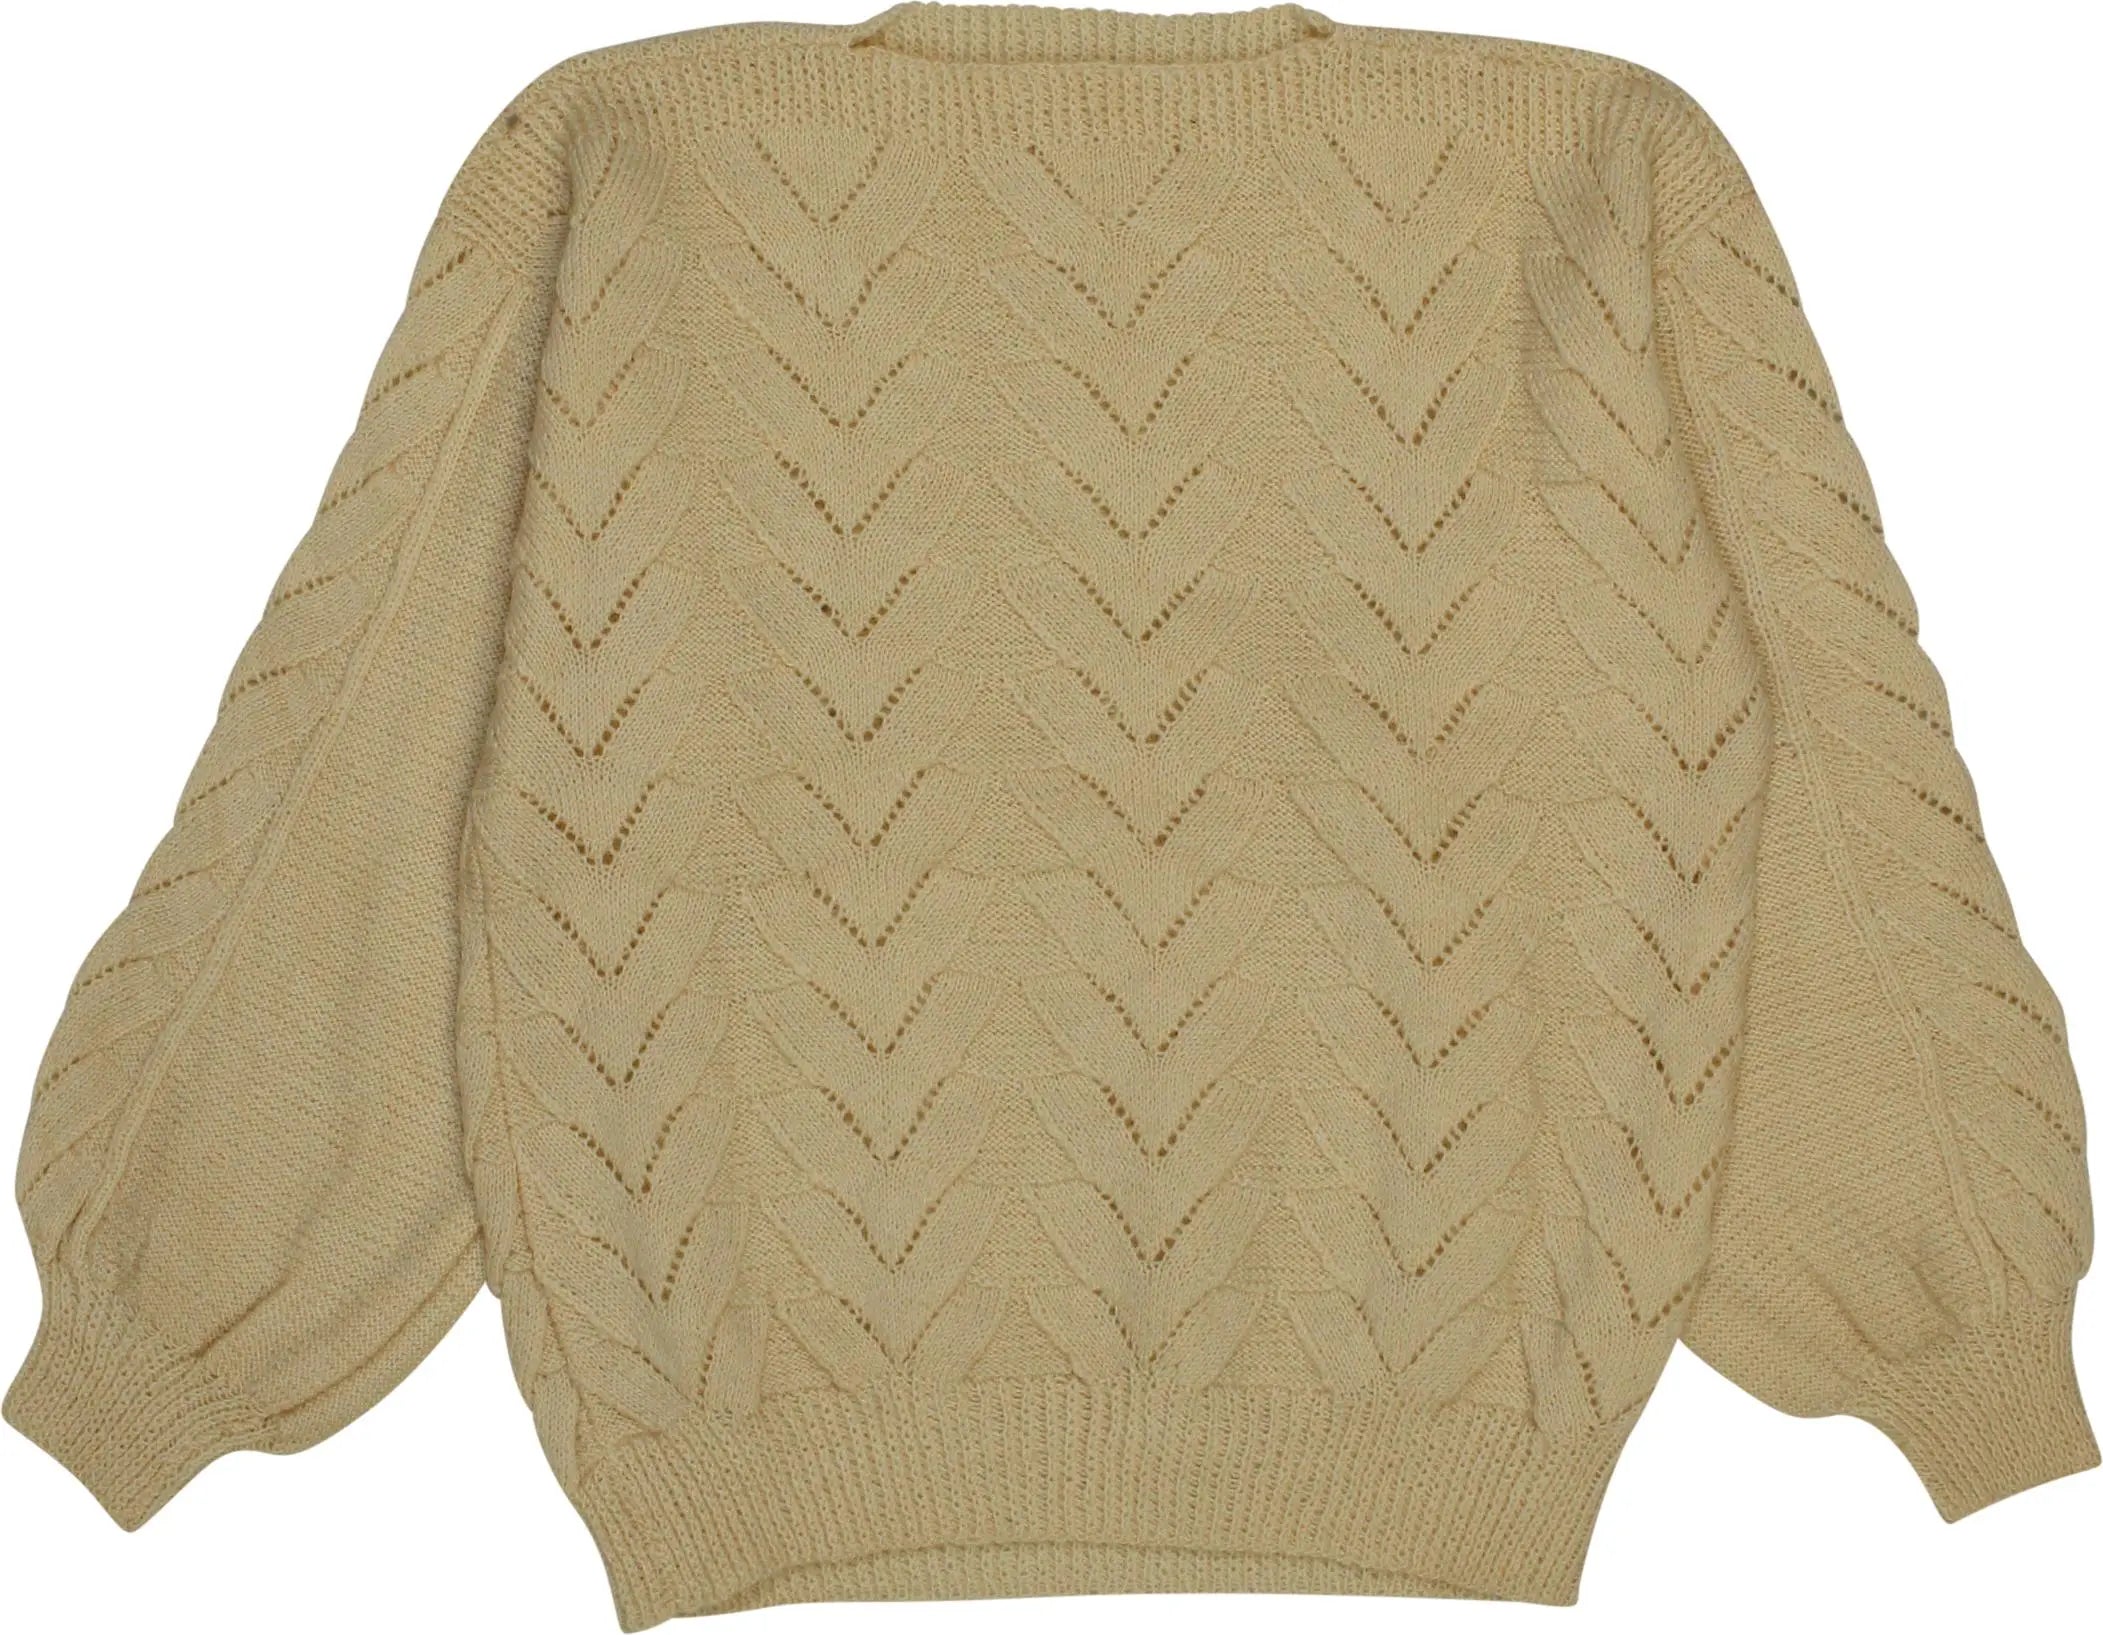 Unknown - Knitted Jumper- ThriftTale.com - Vintage and second handclothing